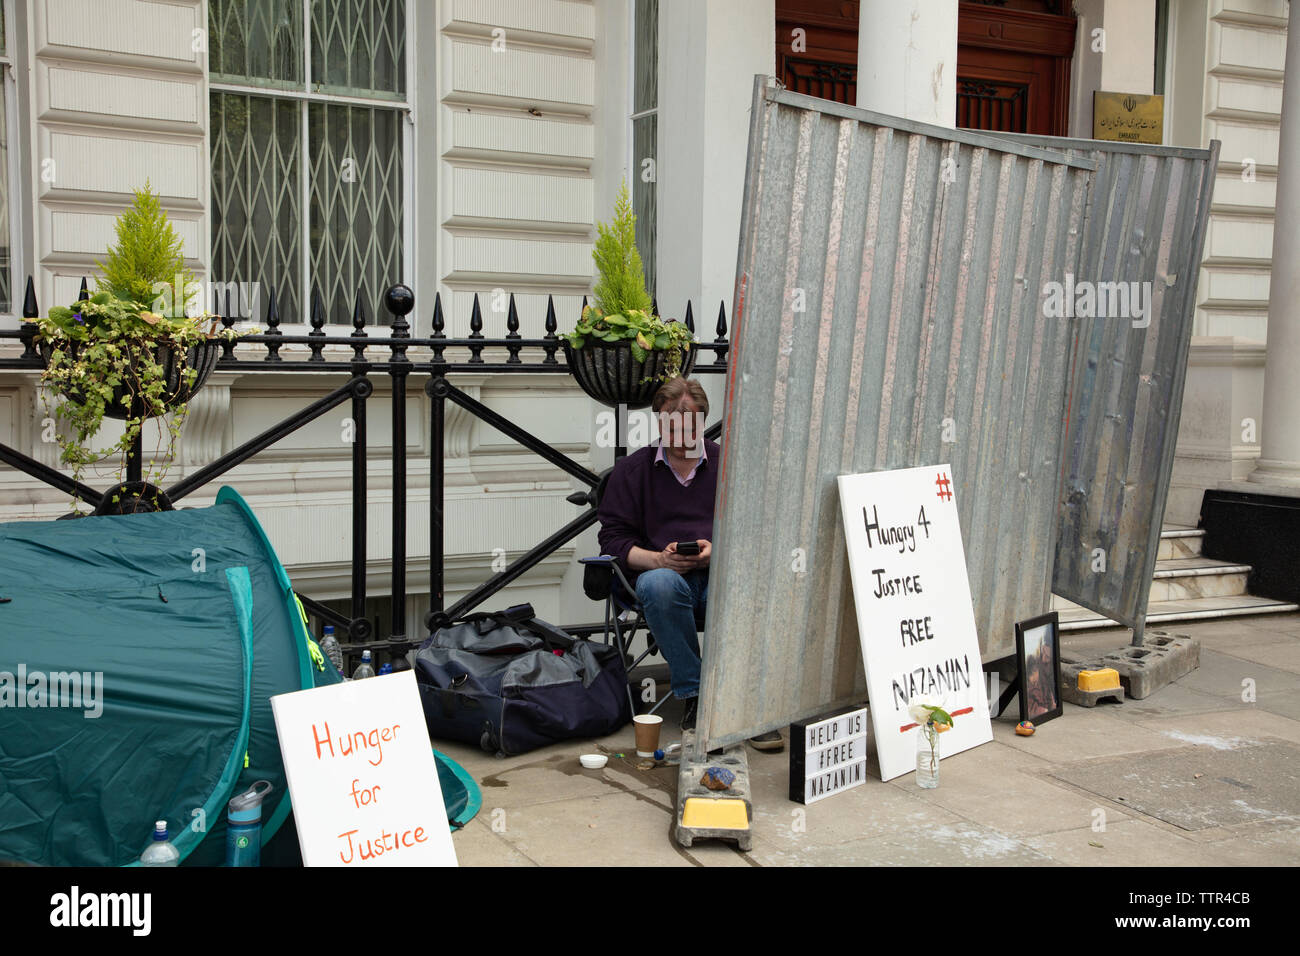 London, UK. 17th June 2019. Hunger striker Richard Ratcliffe behind an iron board, placed there by Iranian embassy staff and builders, in front of the Iranian embassy in London protesting the detention of his wife Nazanin Zaghari in Iran over spying allegations. Credit: Joe Kuis / Alamy Stock Photo